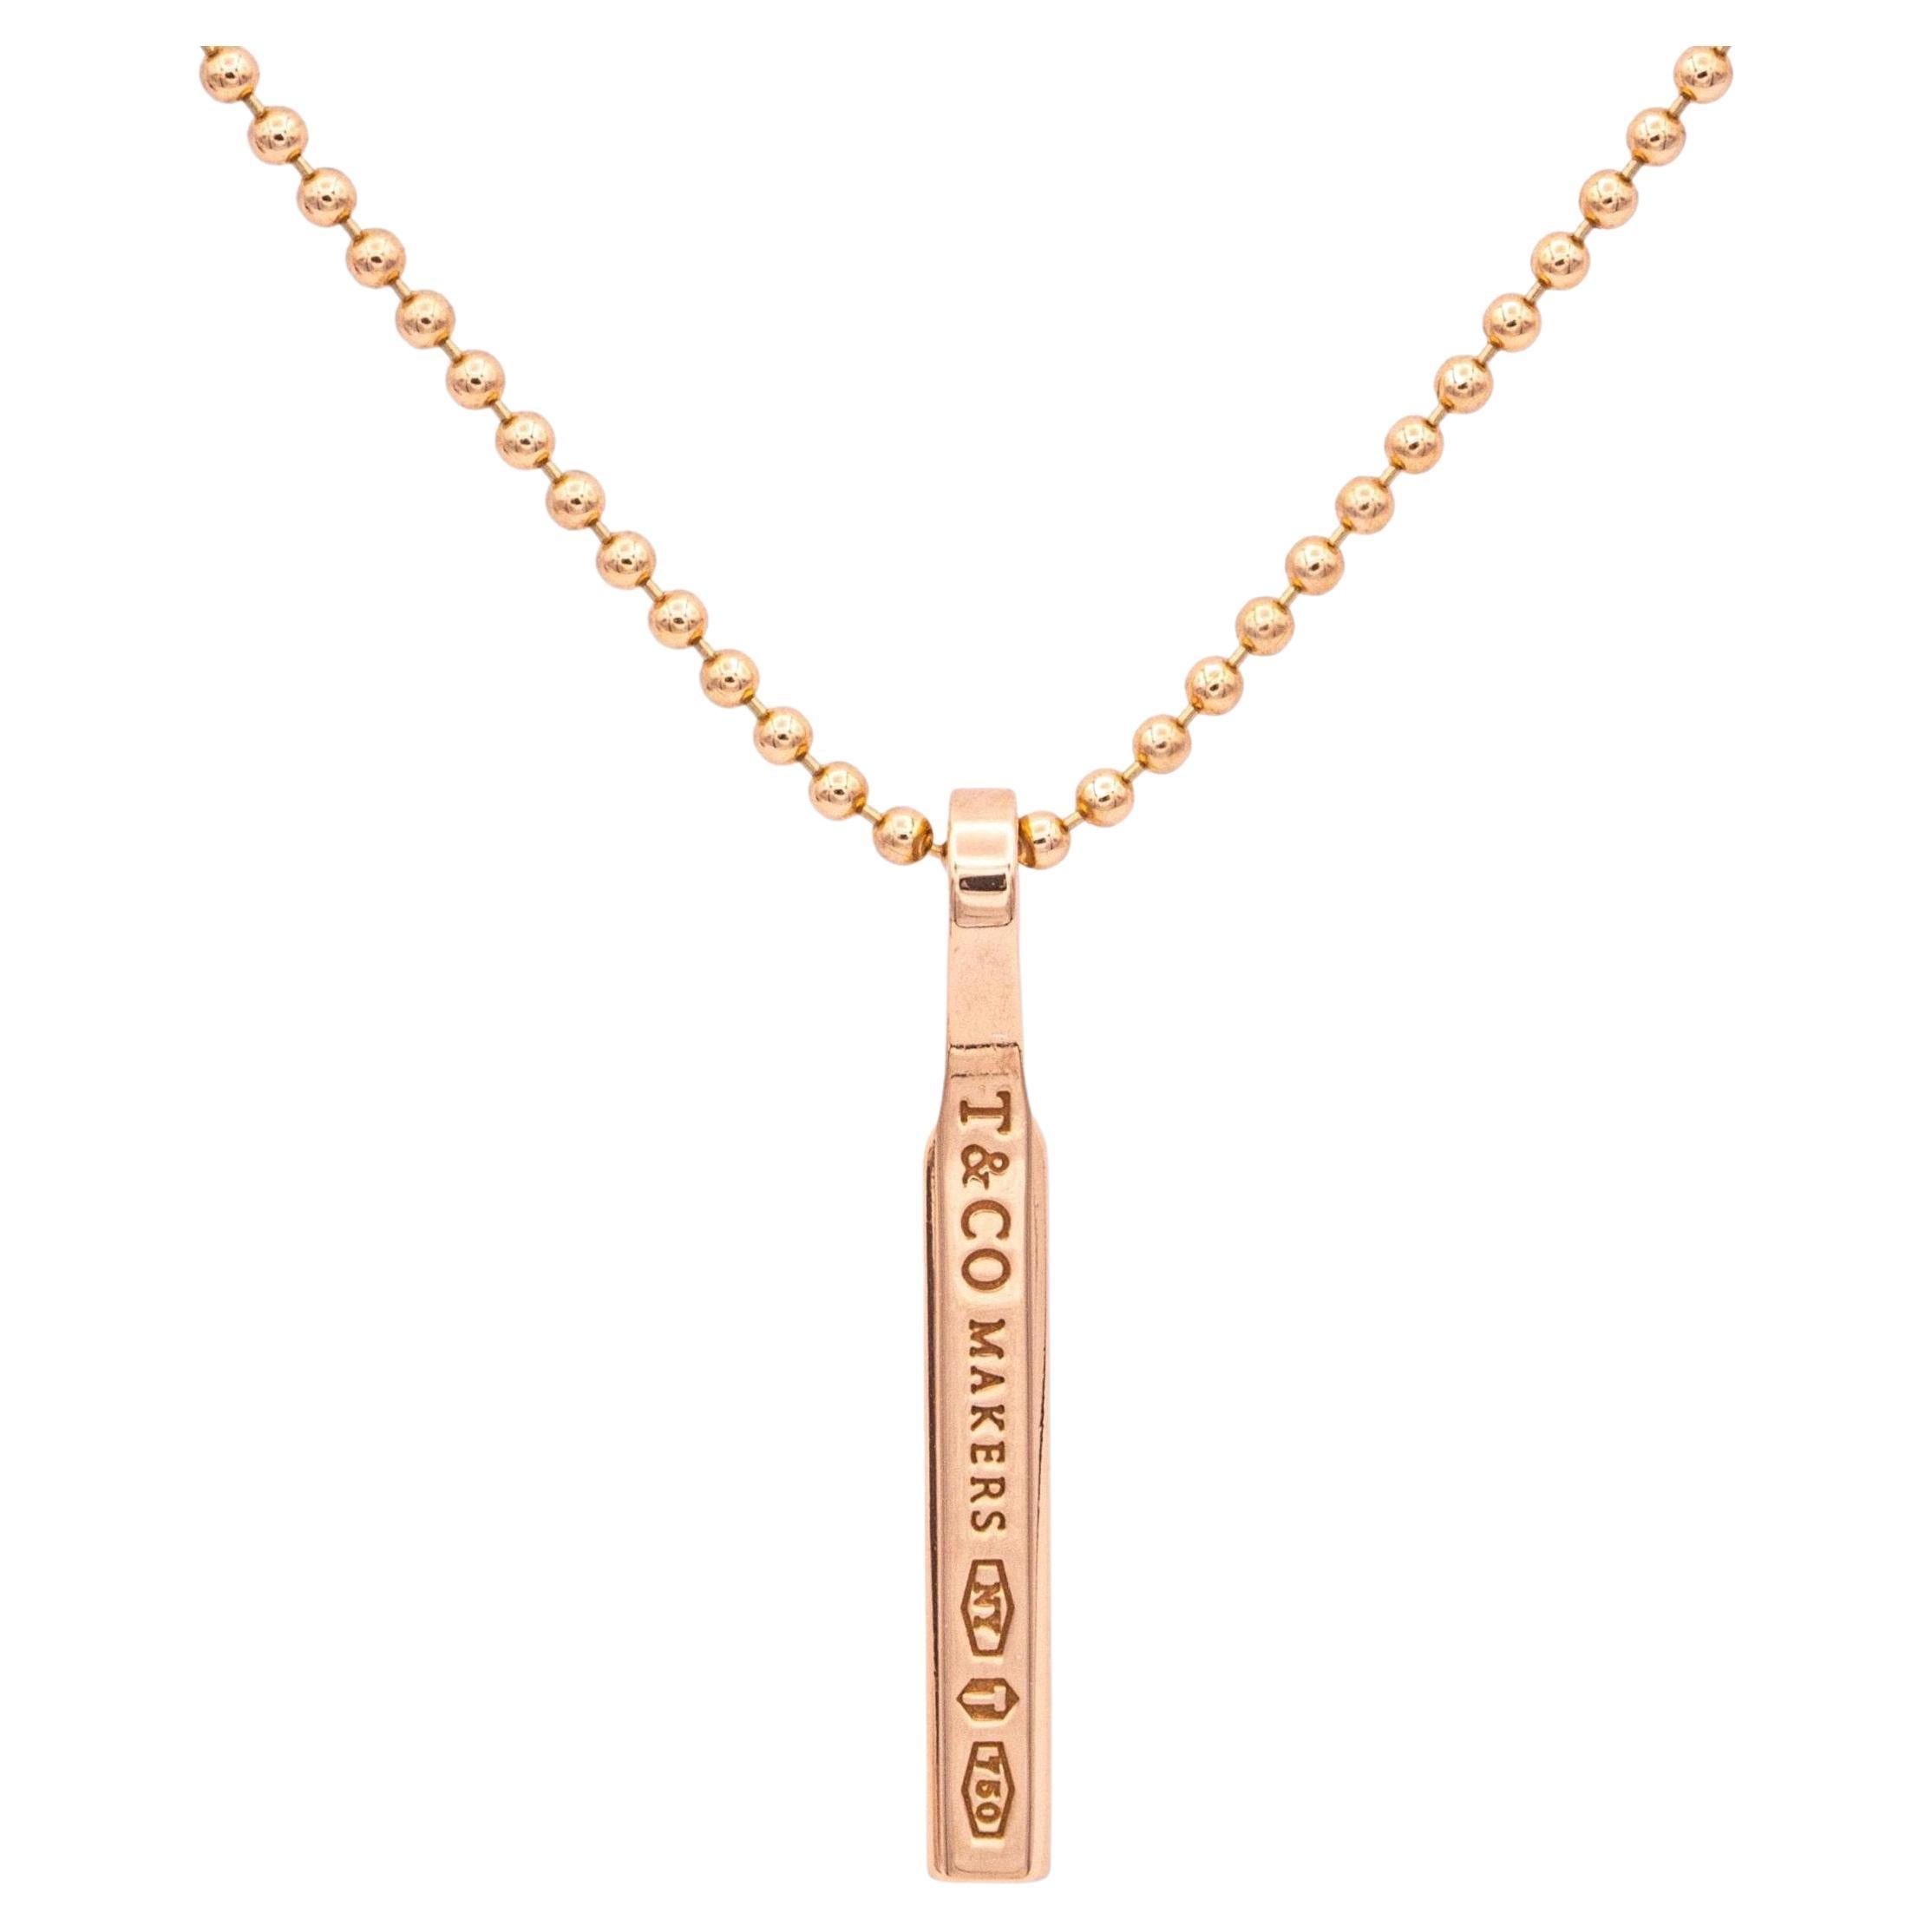 Tiffany & Co. 18K Rose Gold 1837 Makers Bar Pendant Necklace